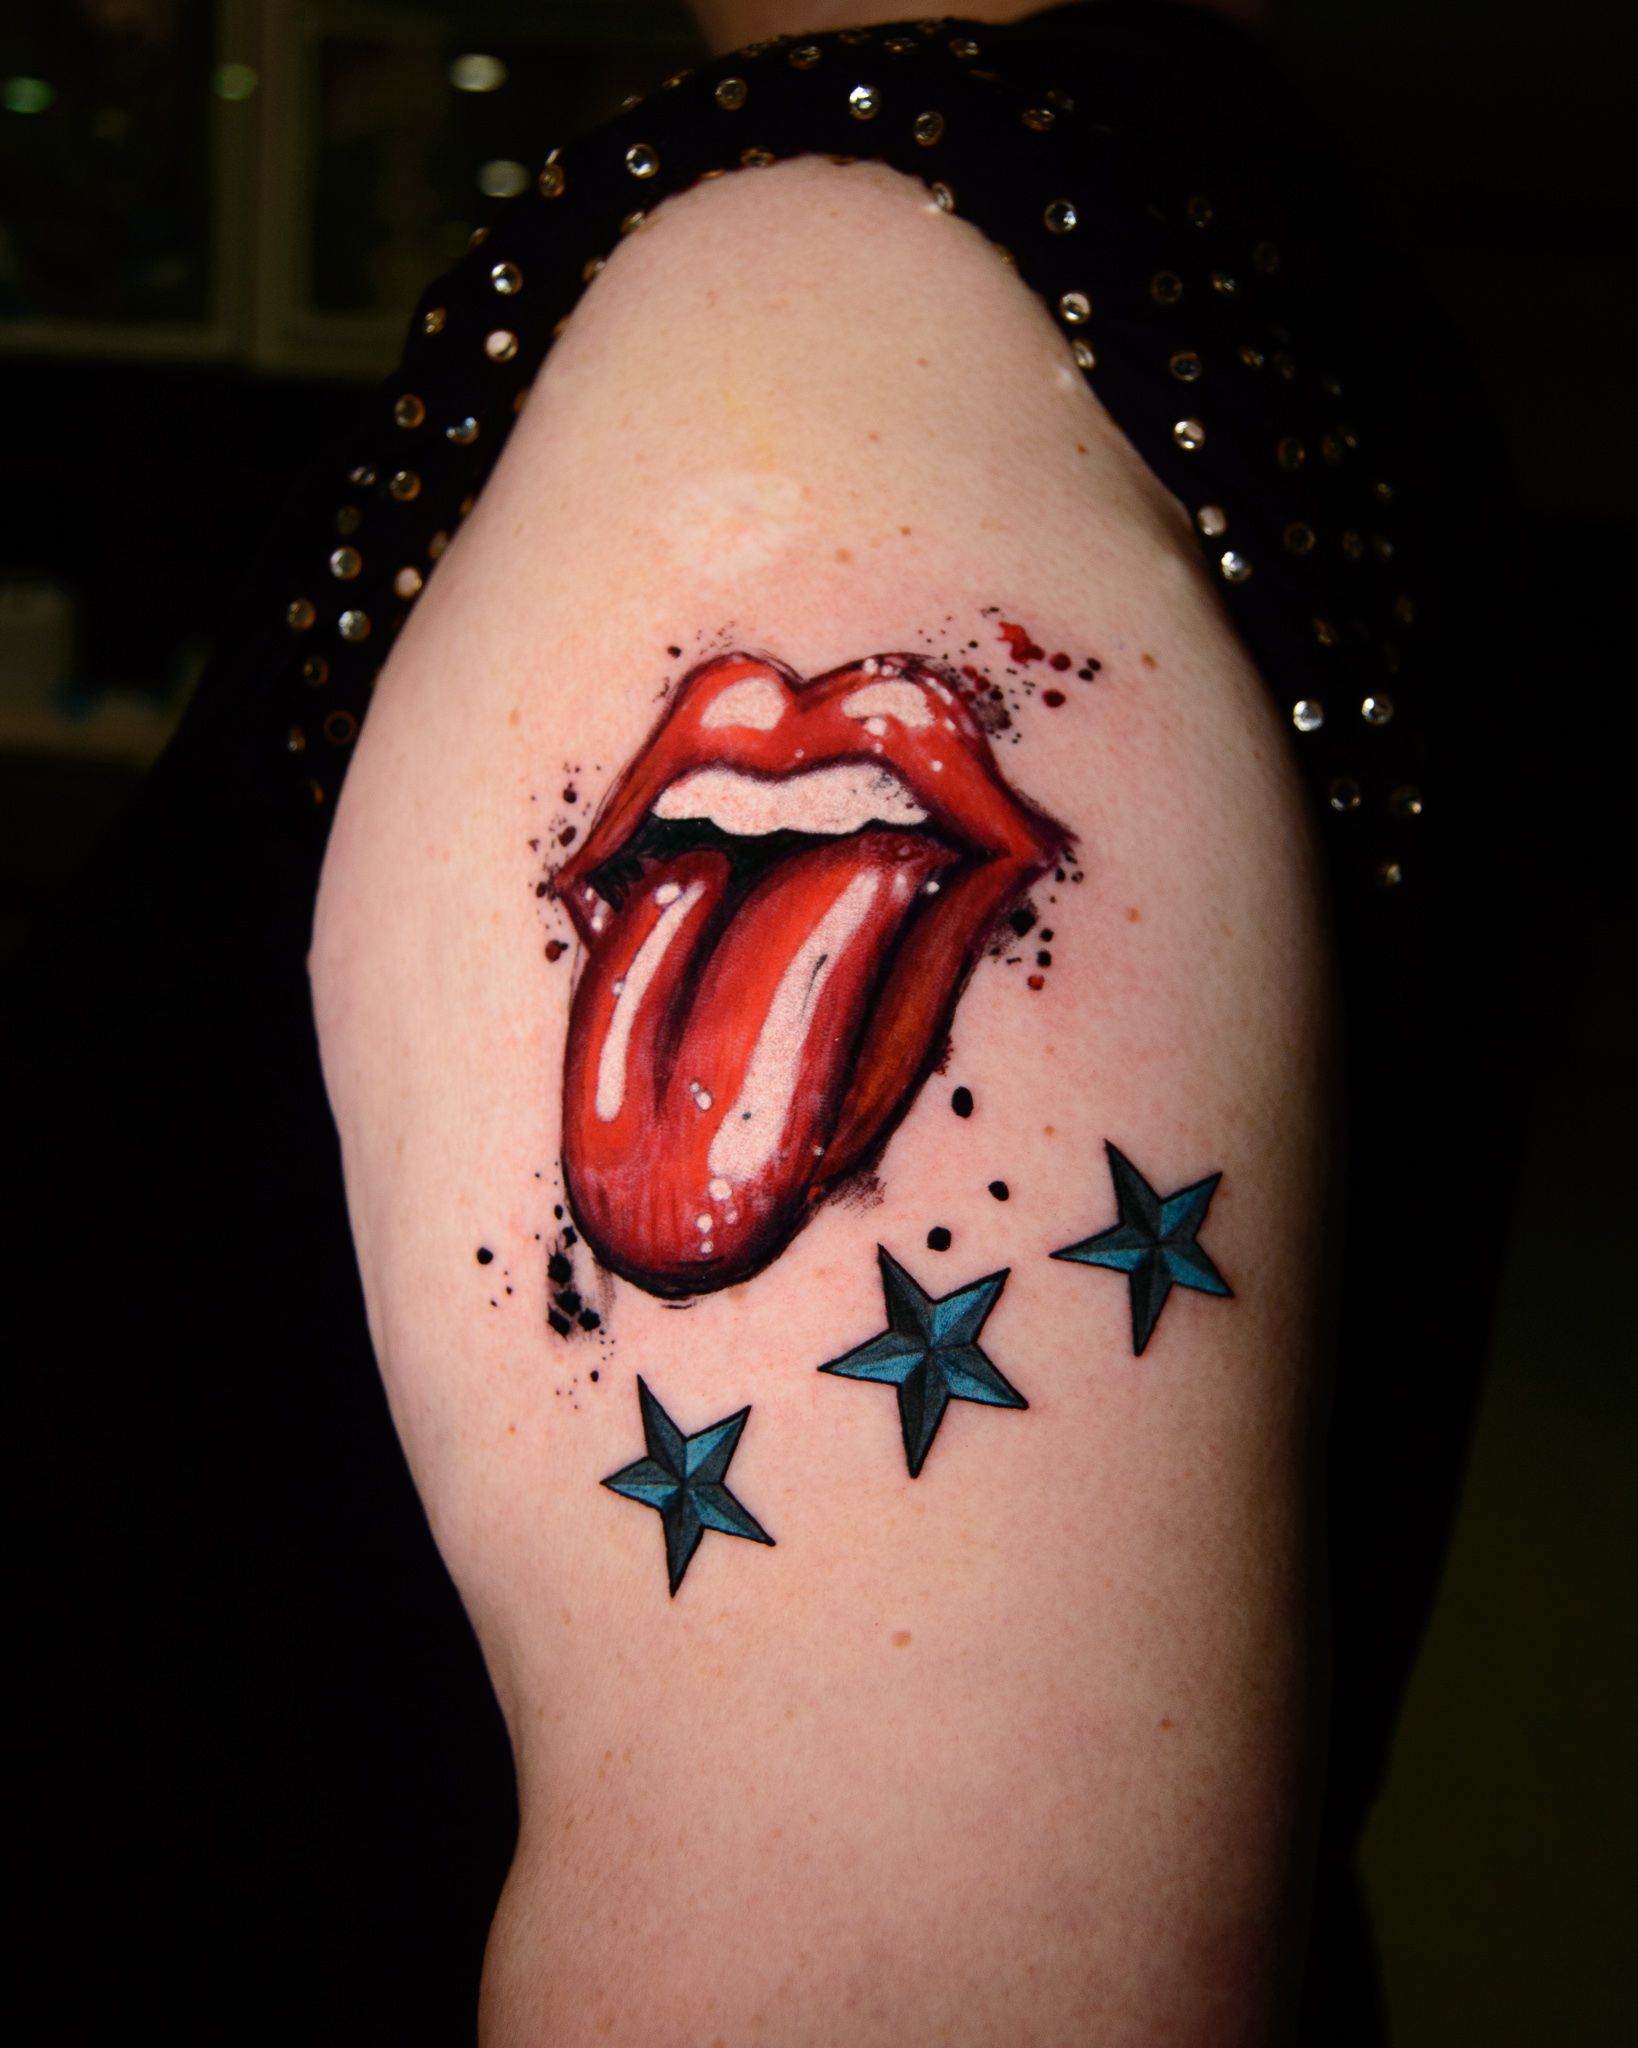 A long time coming but I finally got it done  rrollingstones